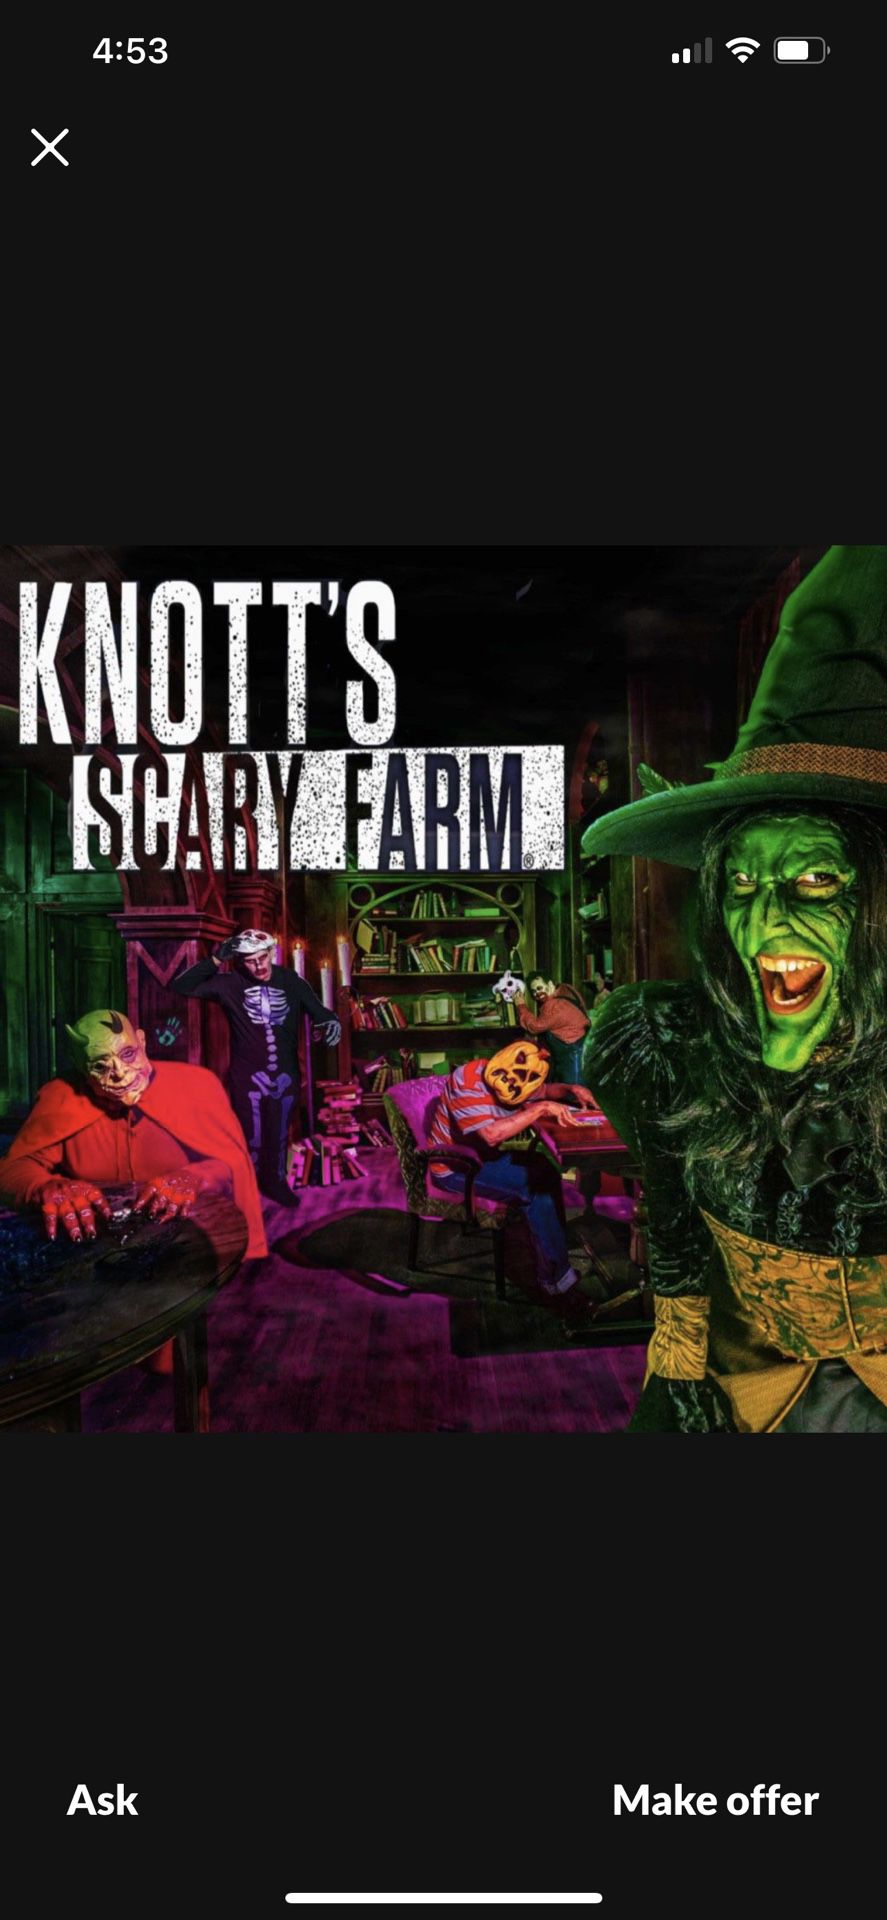 Knotts Scary Farm Tickets Now Available Please Contact Me For Info And Days Your trying To Attend Park Please Serious Inquirers 